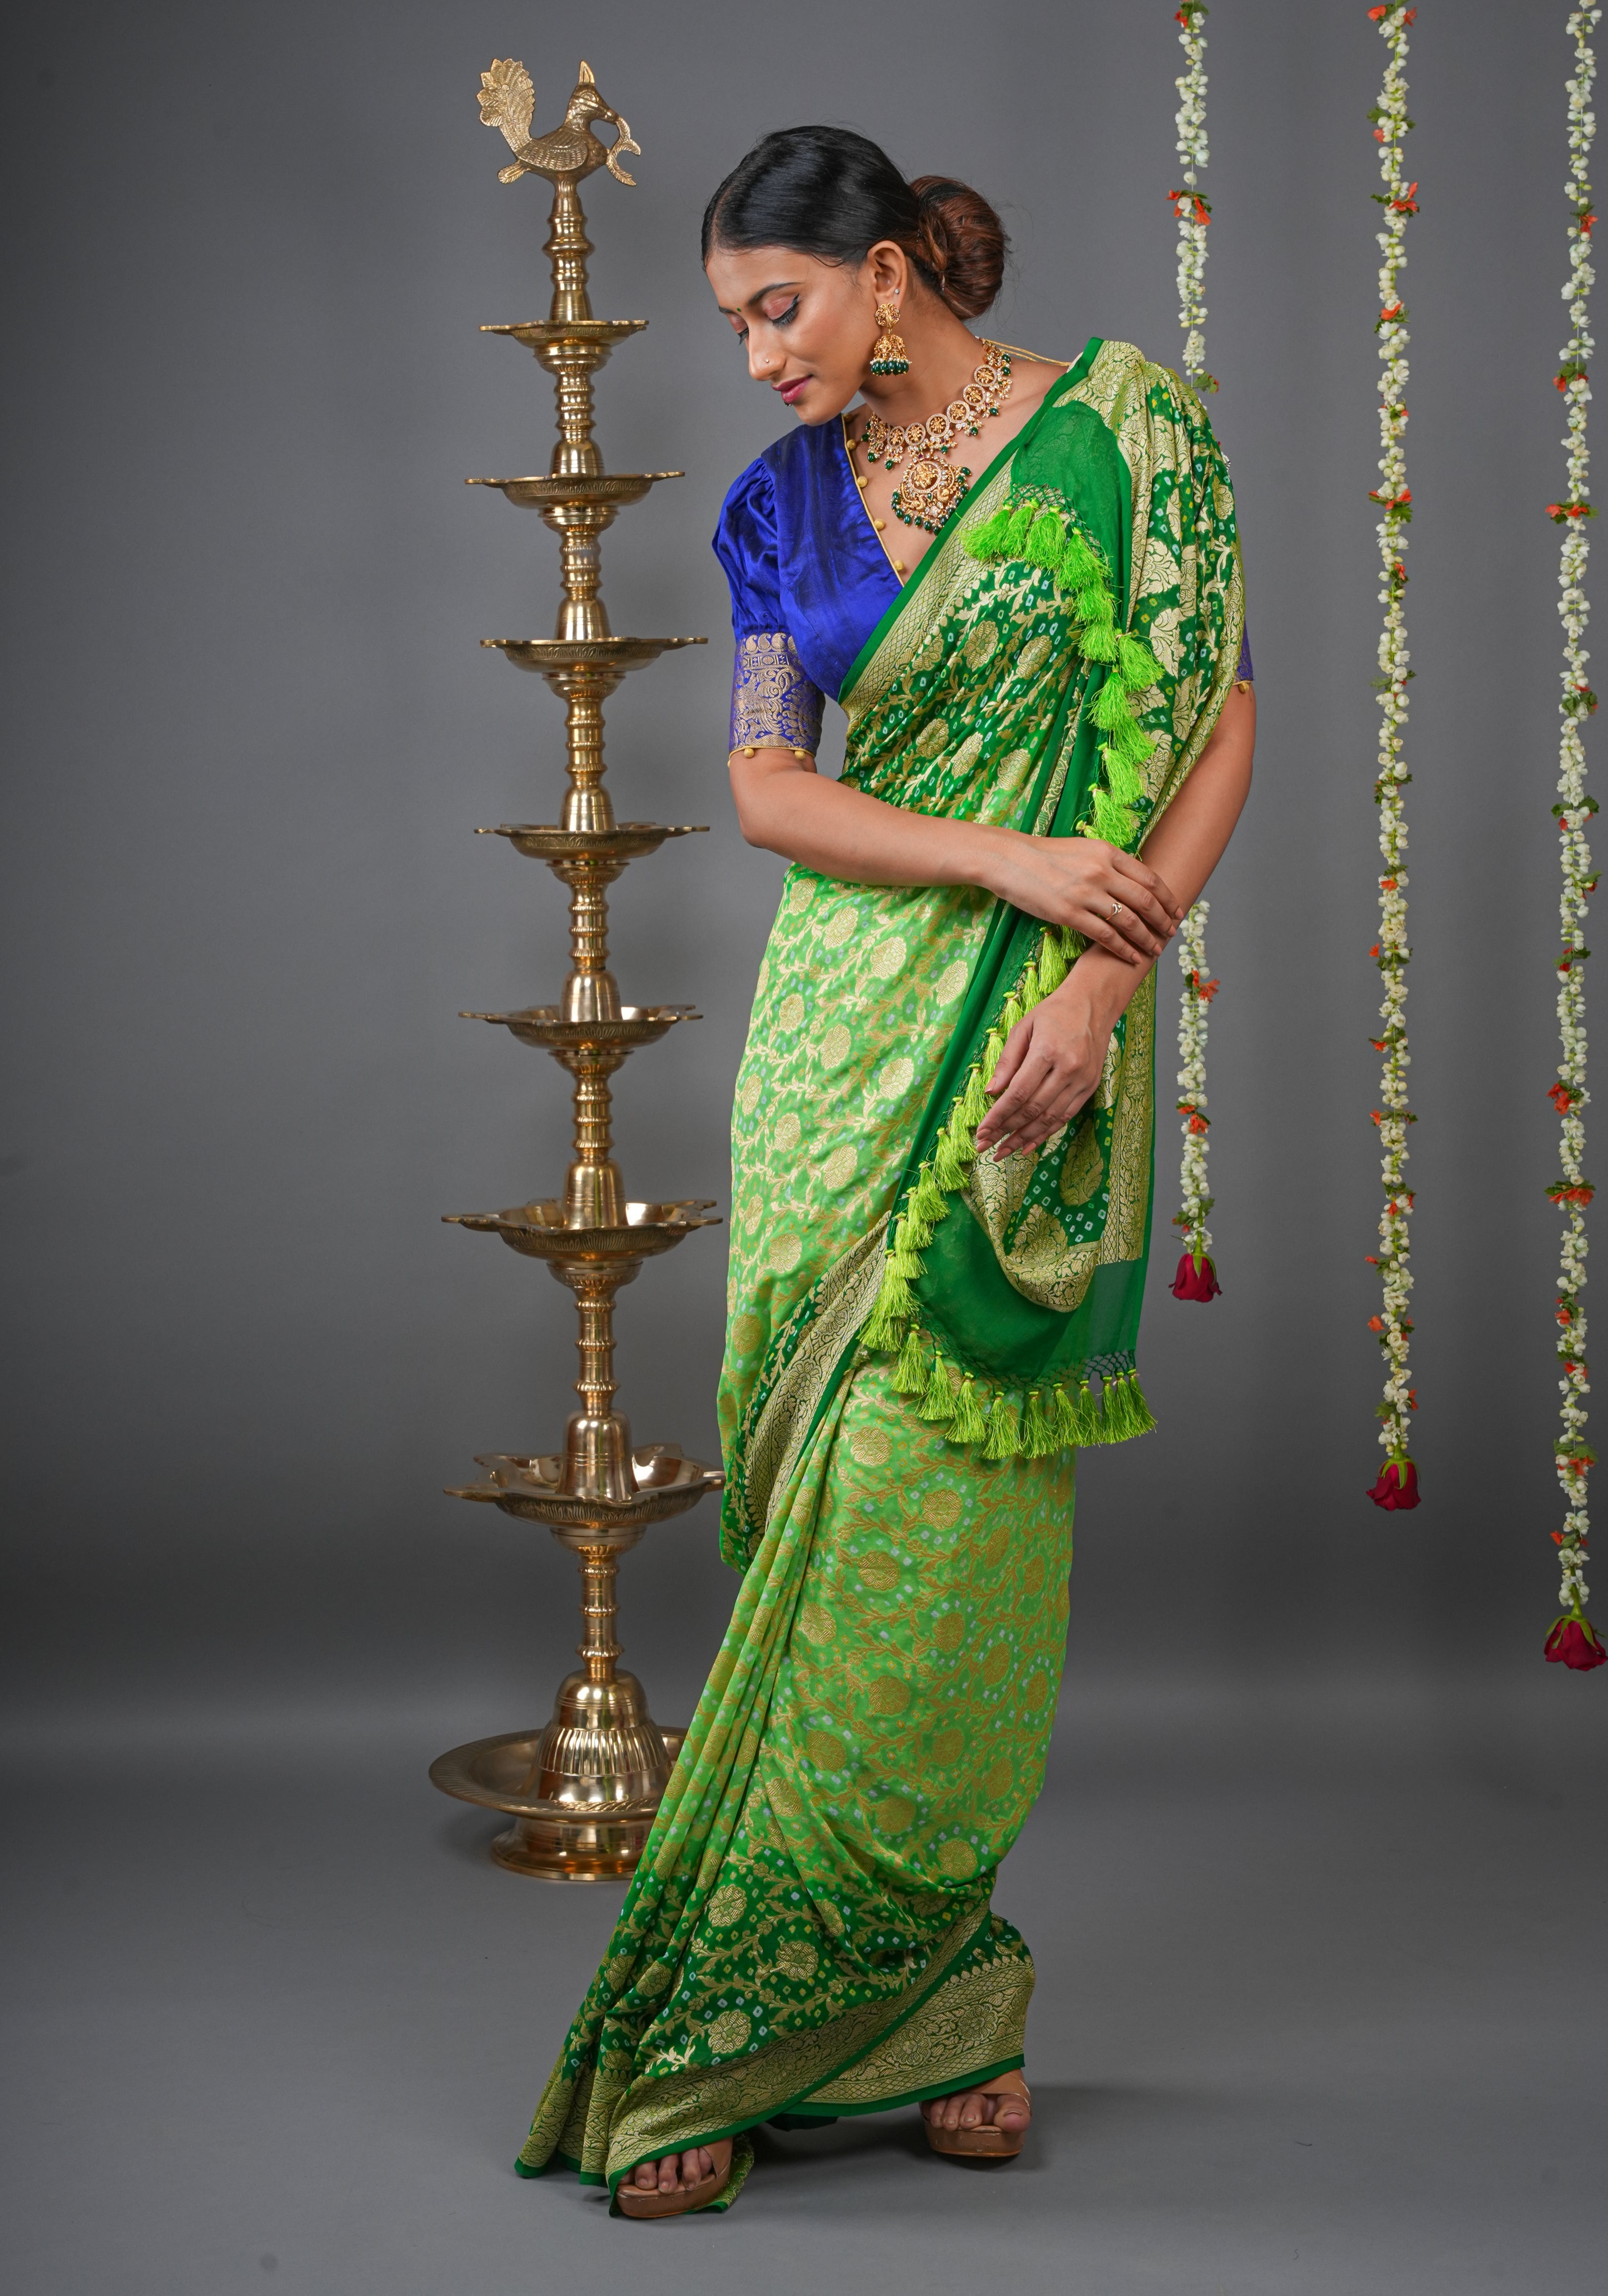 Authentic Hand Bandhej Banarasi Silk Georgette Saree in Ombre shades of Green  | SILK MARK CERTIFIED